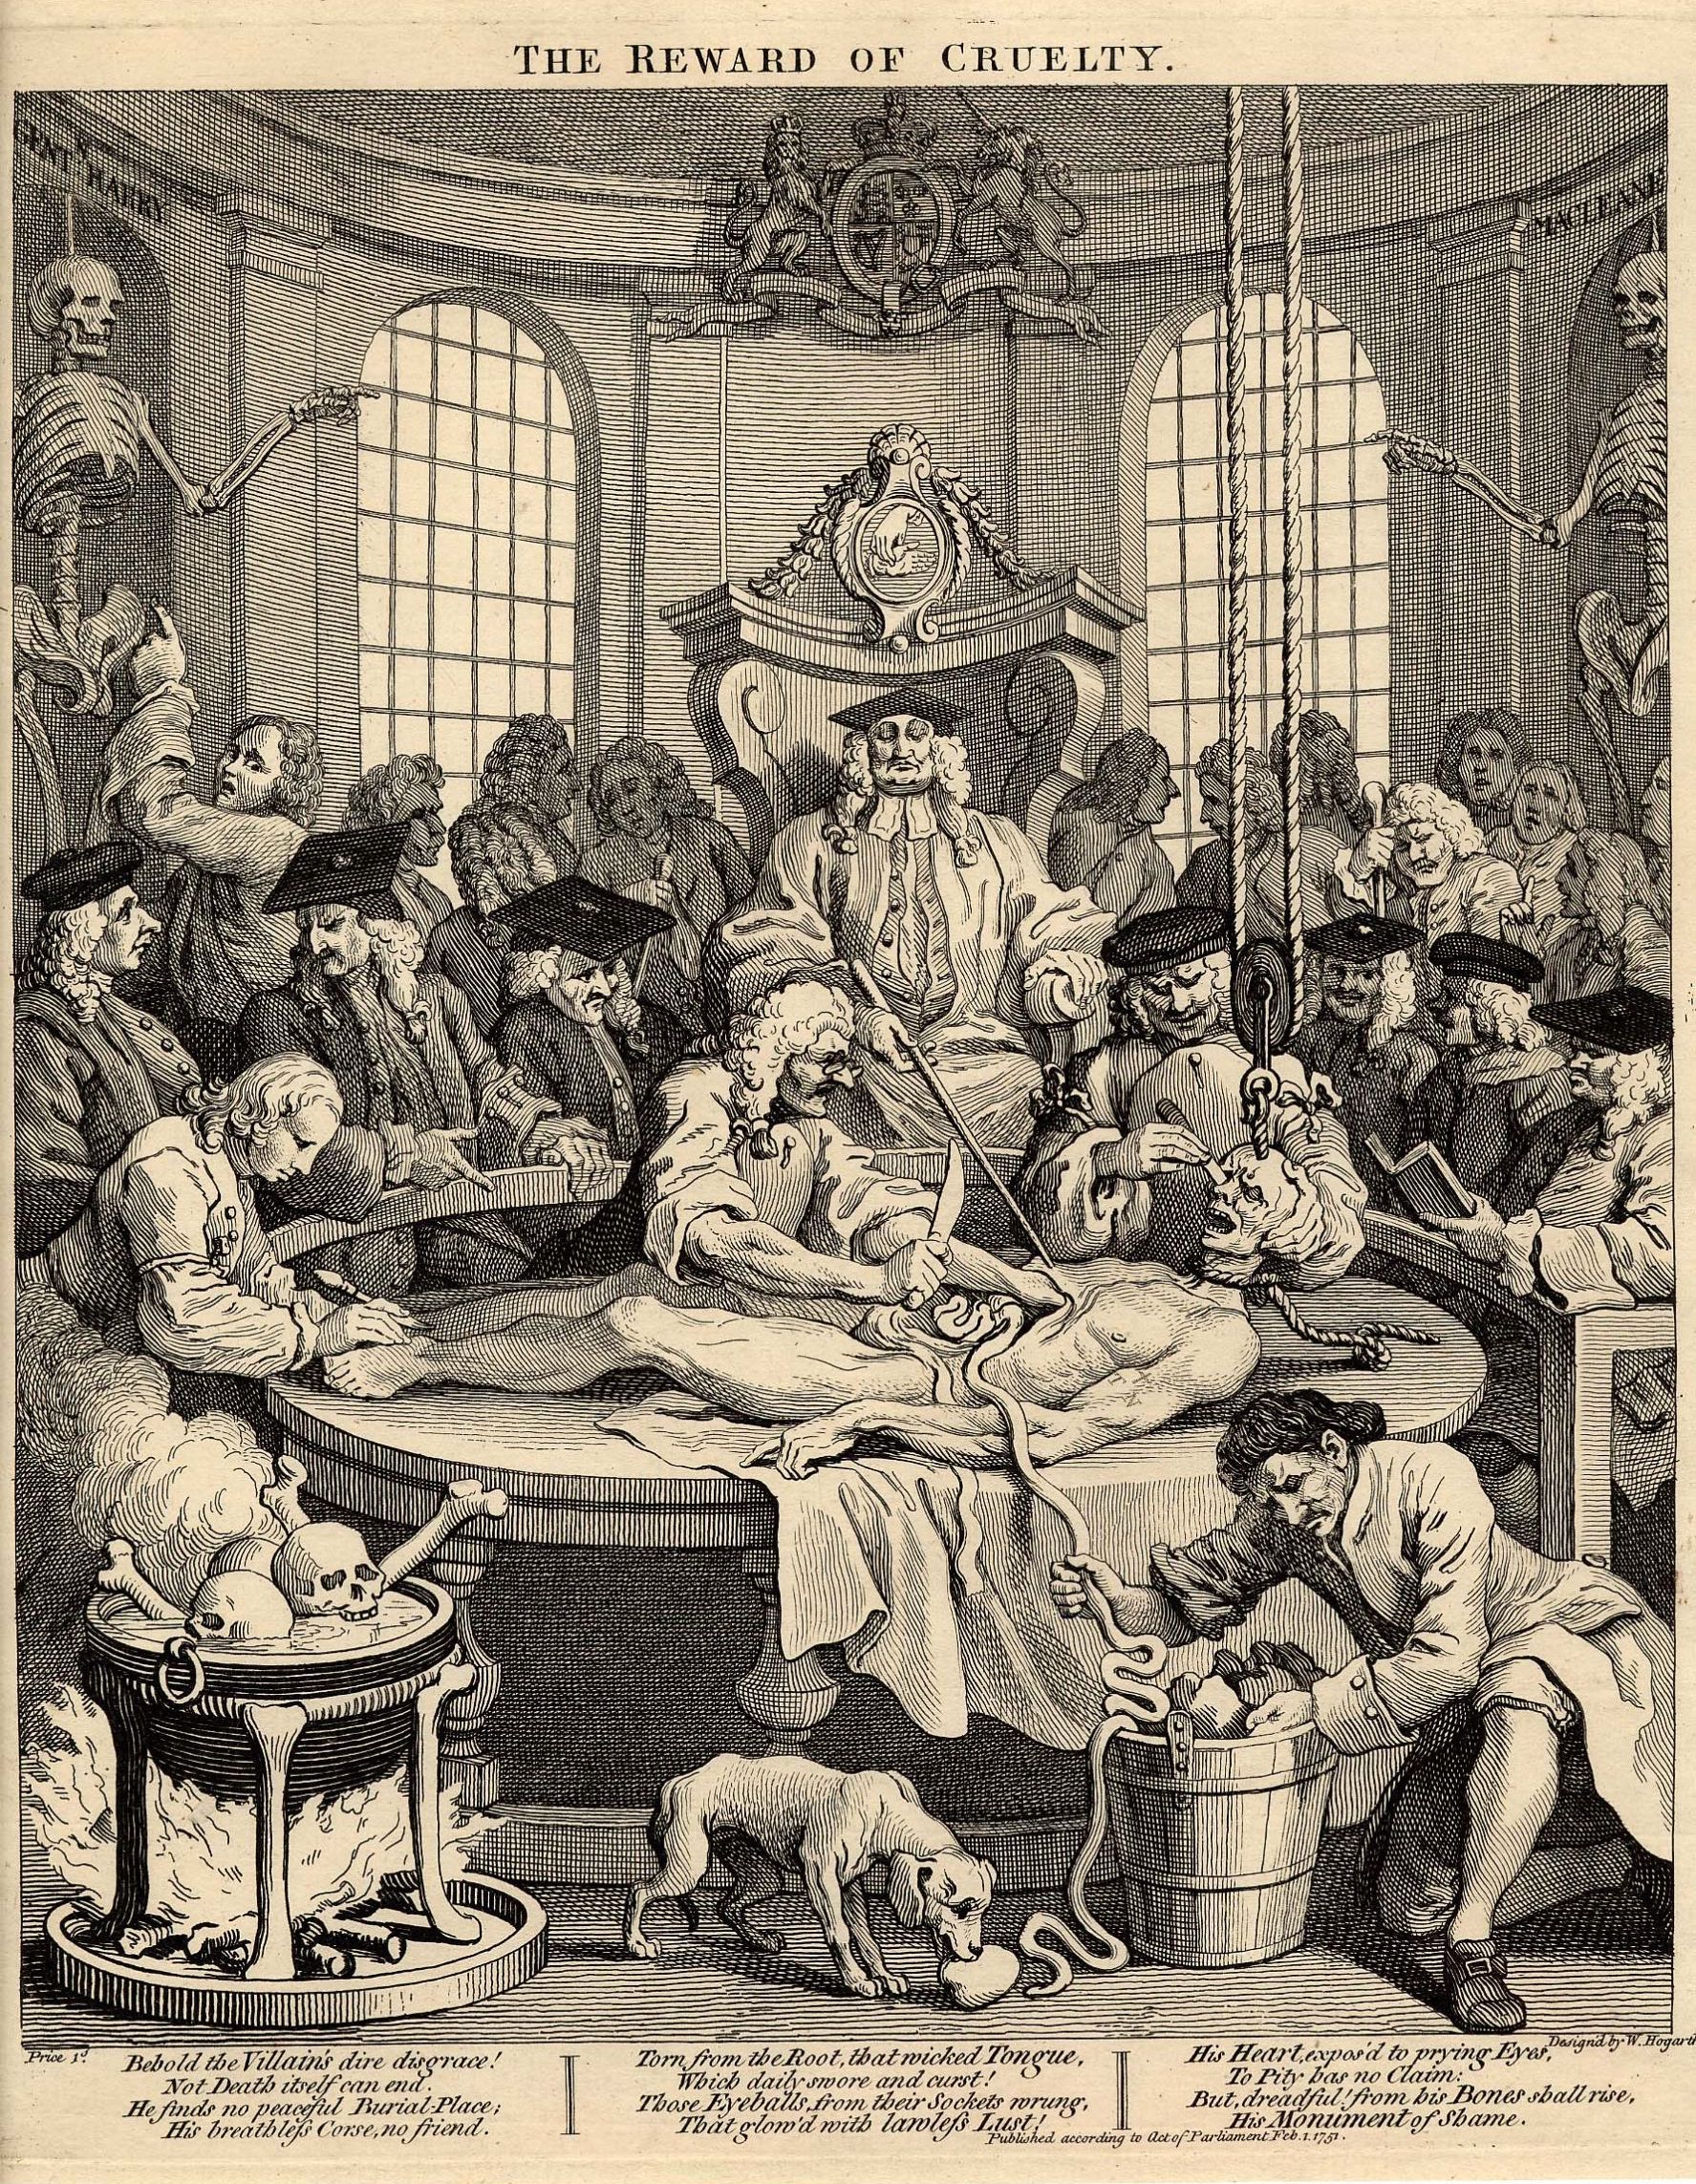 William Hogarth's "The Anatomy Lesson (The Reward of Cruelty)" 1751, satirizes a criminal dissection.